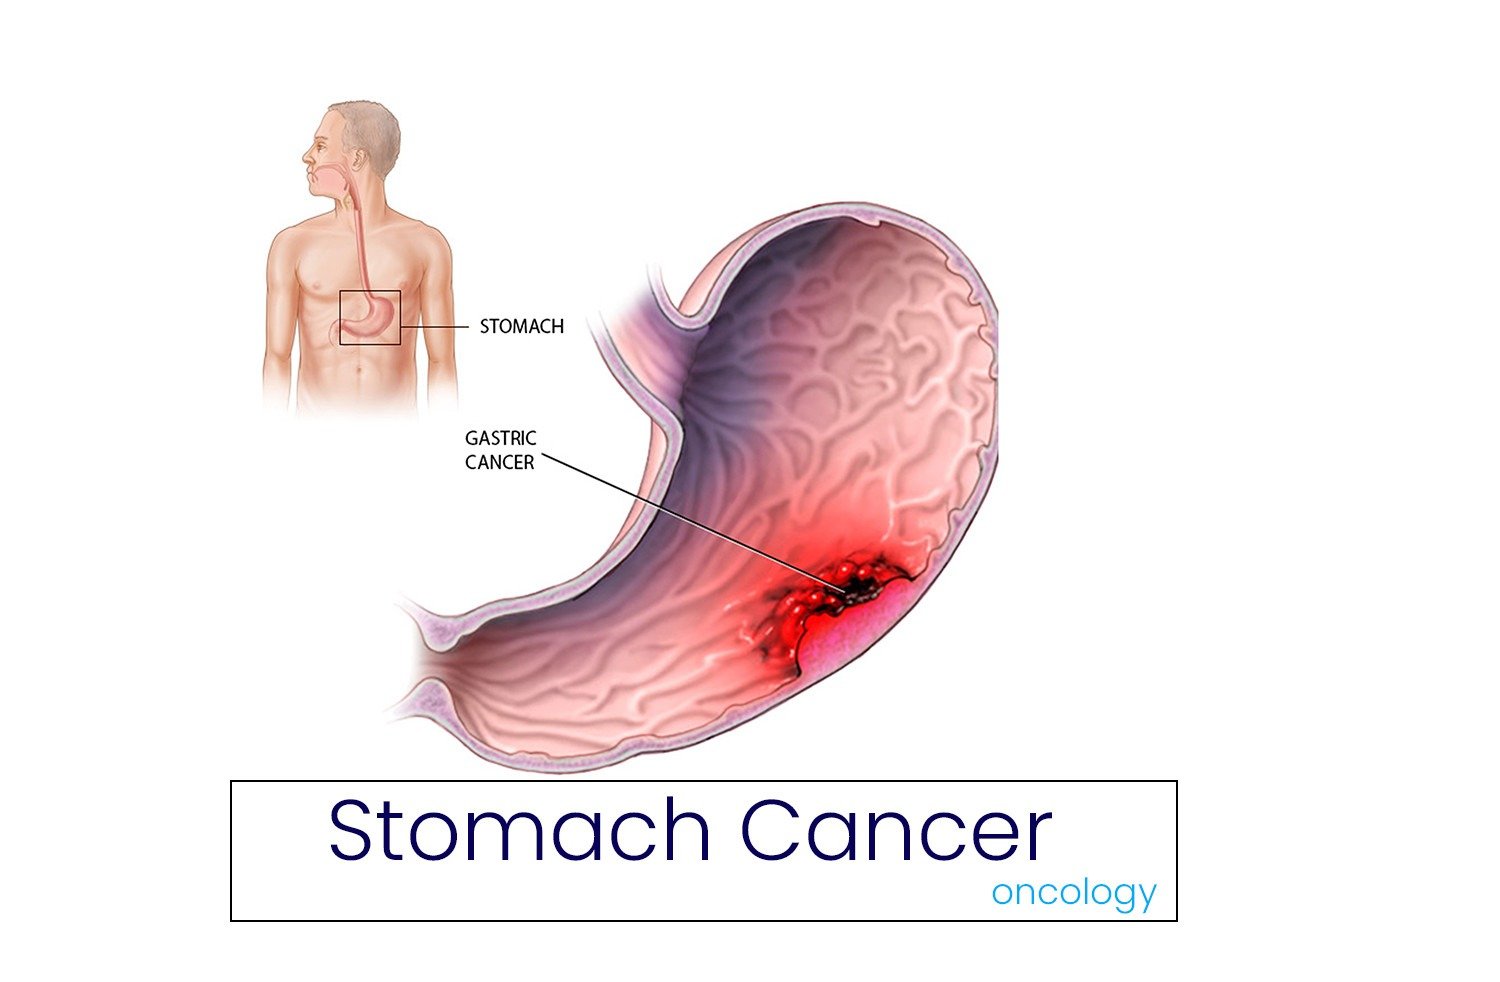 Stomach Cancer: Causes, Symptoms, Staging, Diagnosis and Treatment